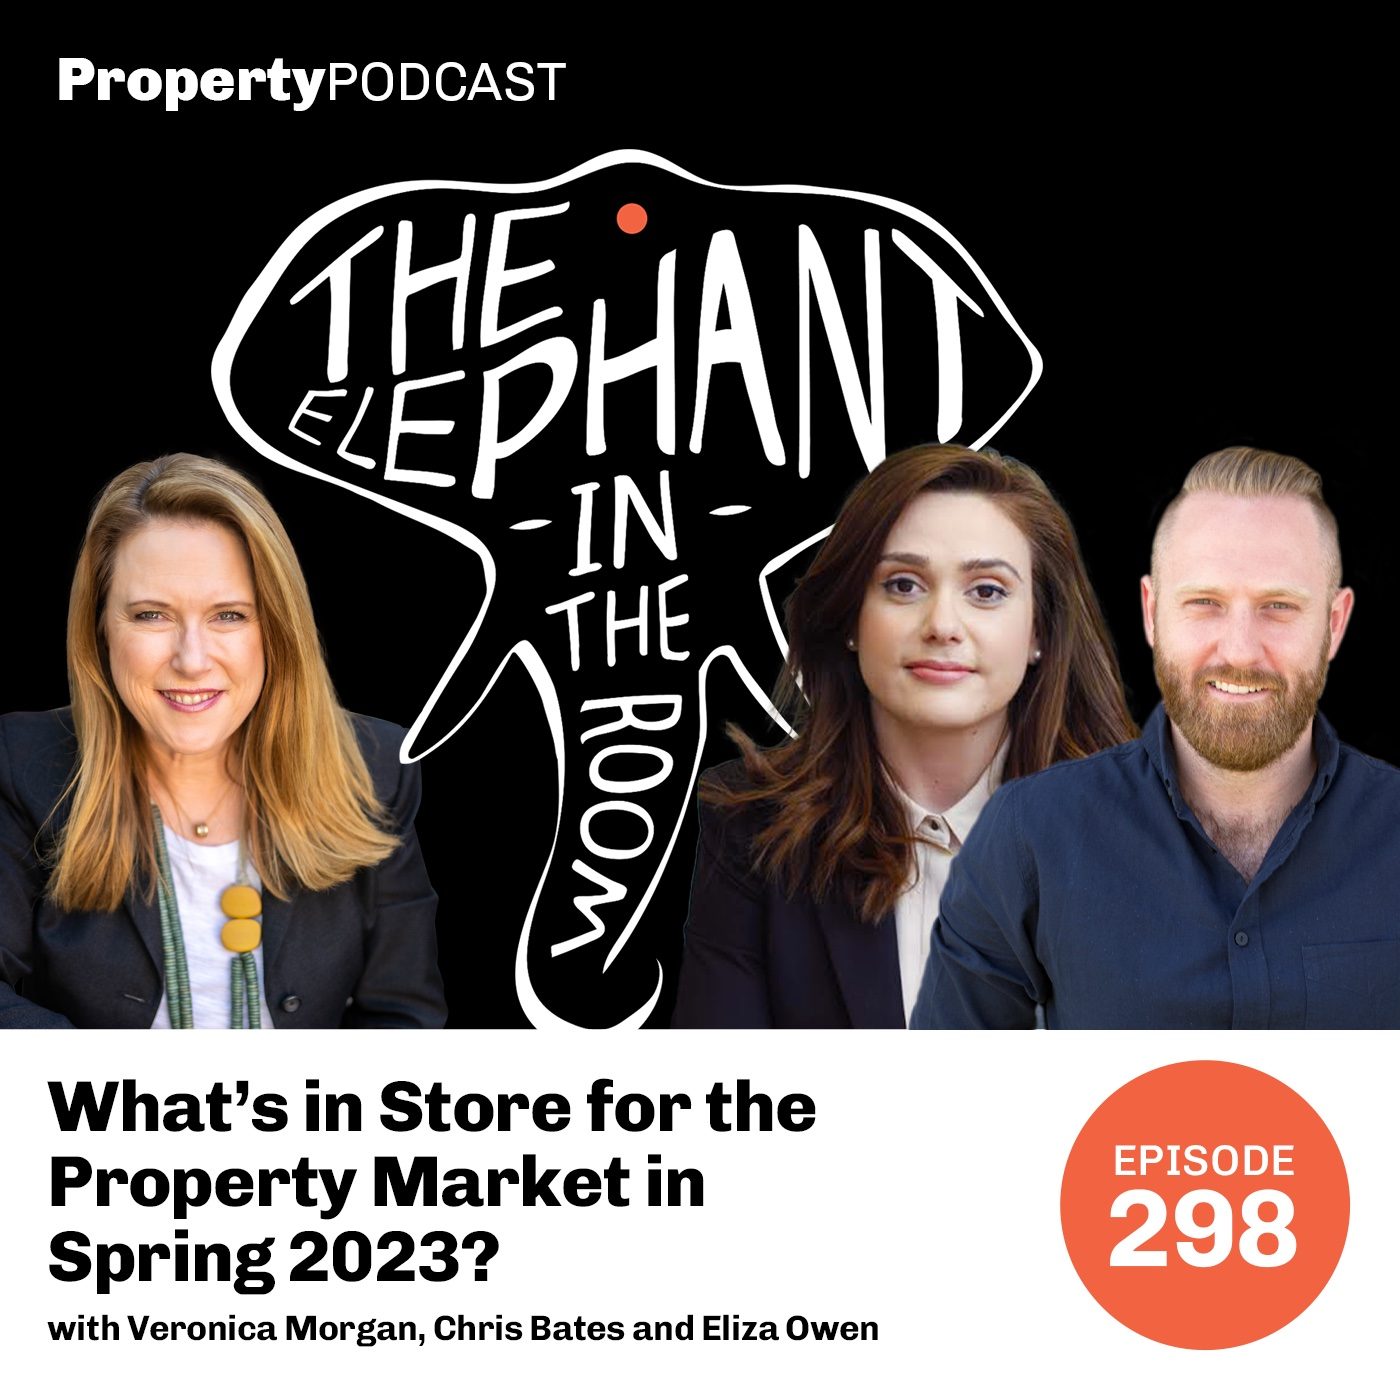 What’s in Store for the Property Market in Spring 2023?